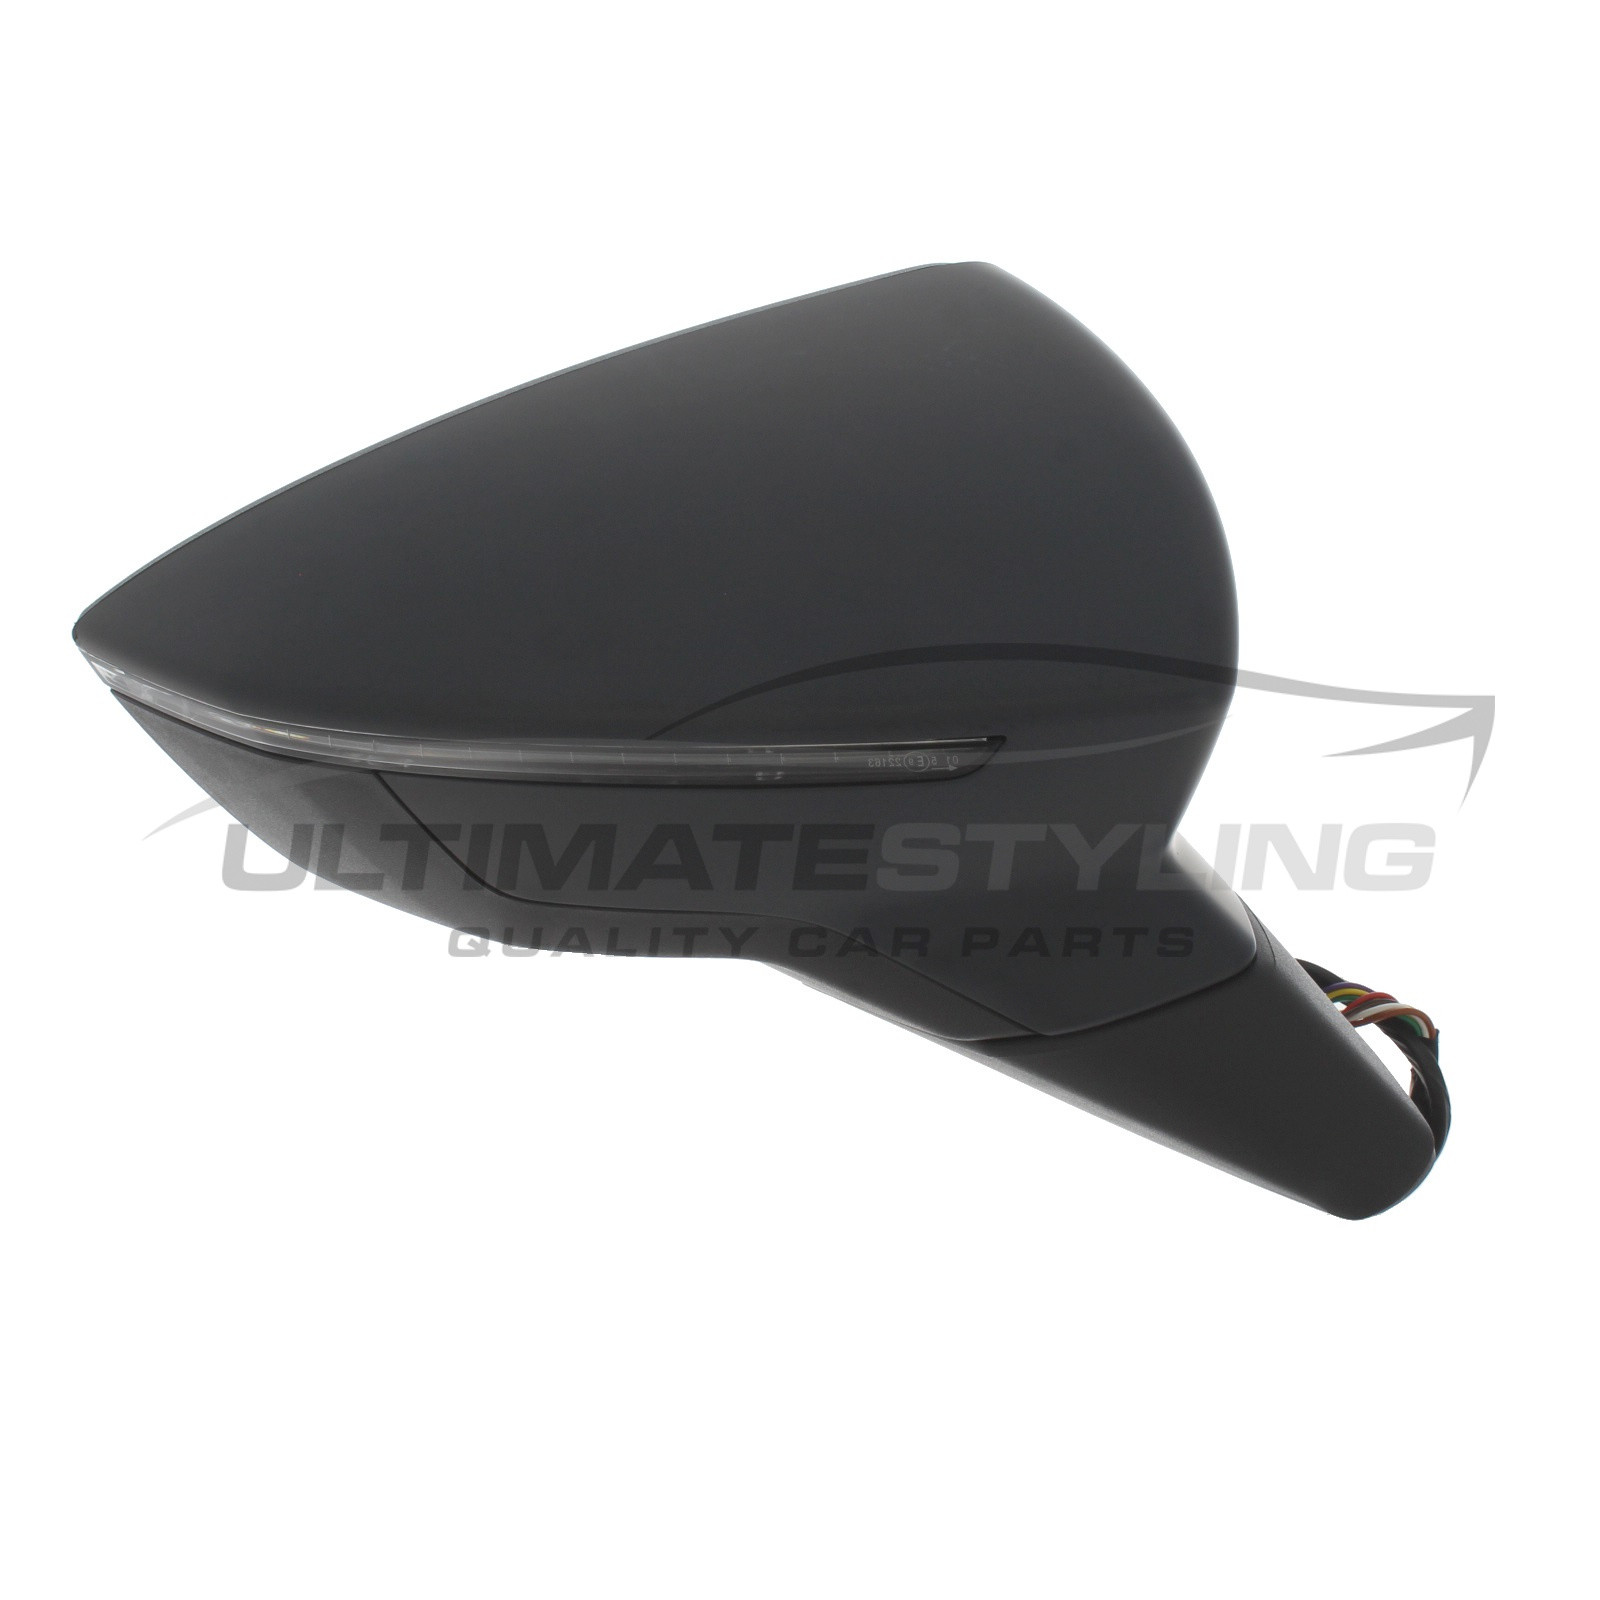 Seat Leon Wing Mirror / Door Mirror - Drivers Side (RH) - Electric adjustment - Heated Glass - Power Folding - Indicator - Primed